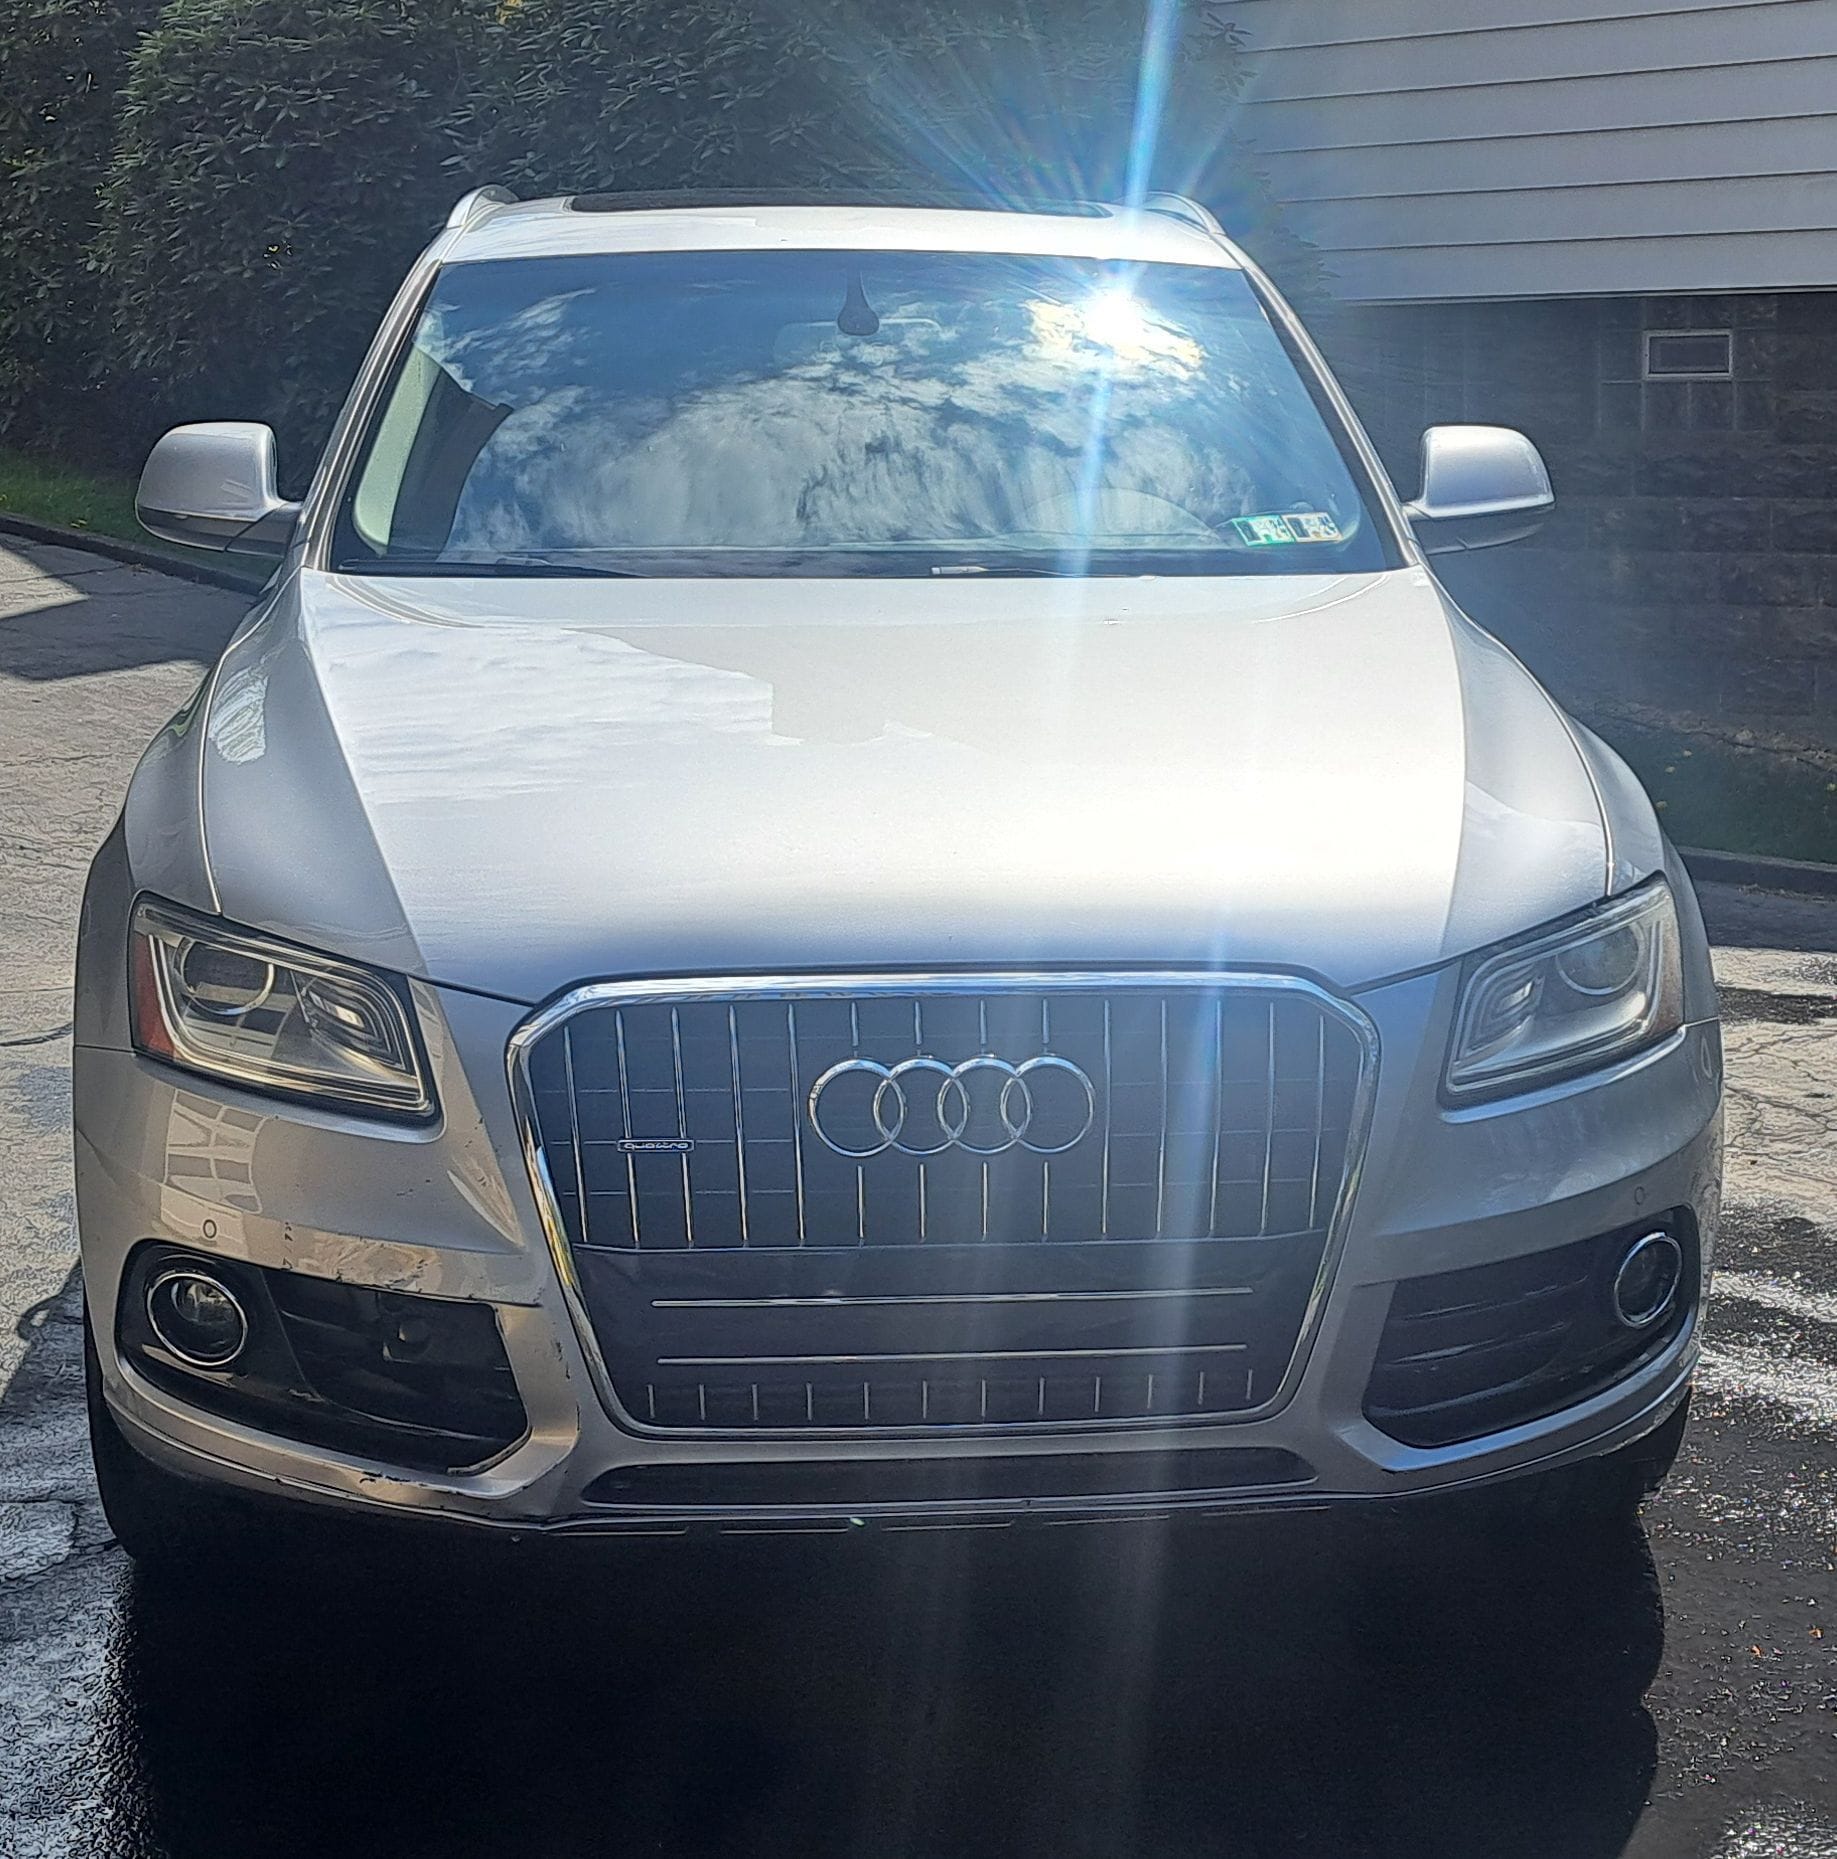 2015 Audi Q5 - Great price on a 2015 Audi Q5 2.0t Premium Plus - Used - VIN 2015 Audi Q5 2.0t - 156,000 Miles - 4 cyl - AWD - Automatic - SUV - Silver - Pittsburgh, PA 15216, United States